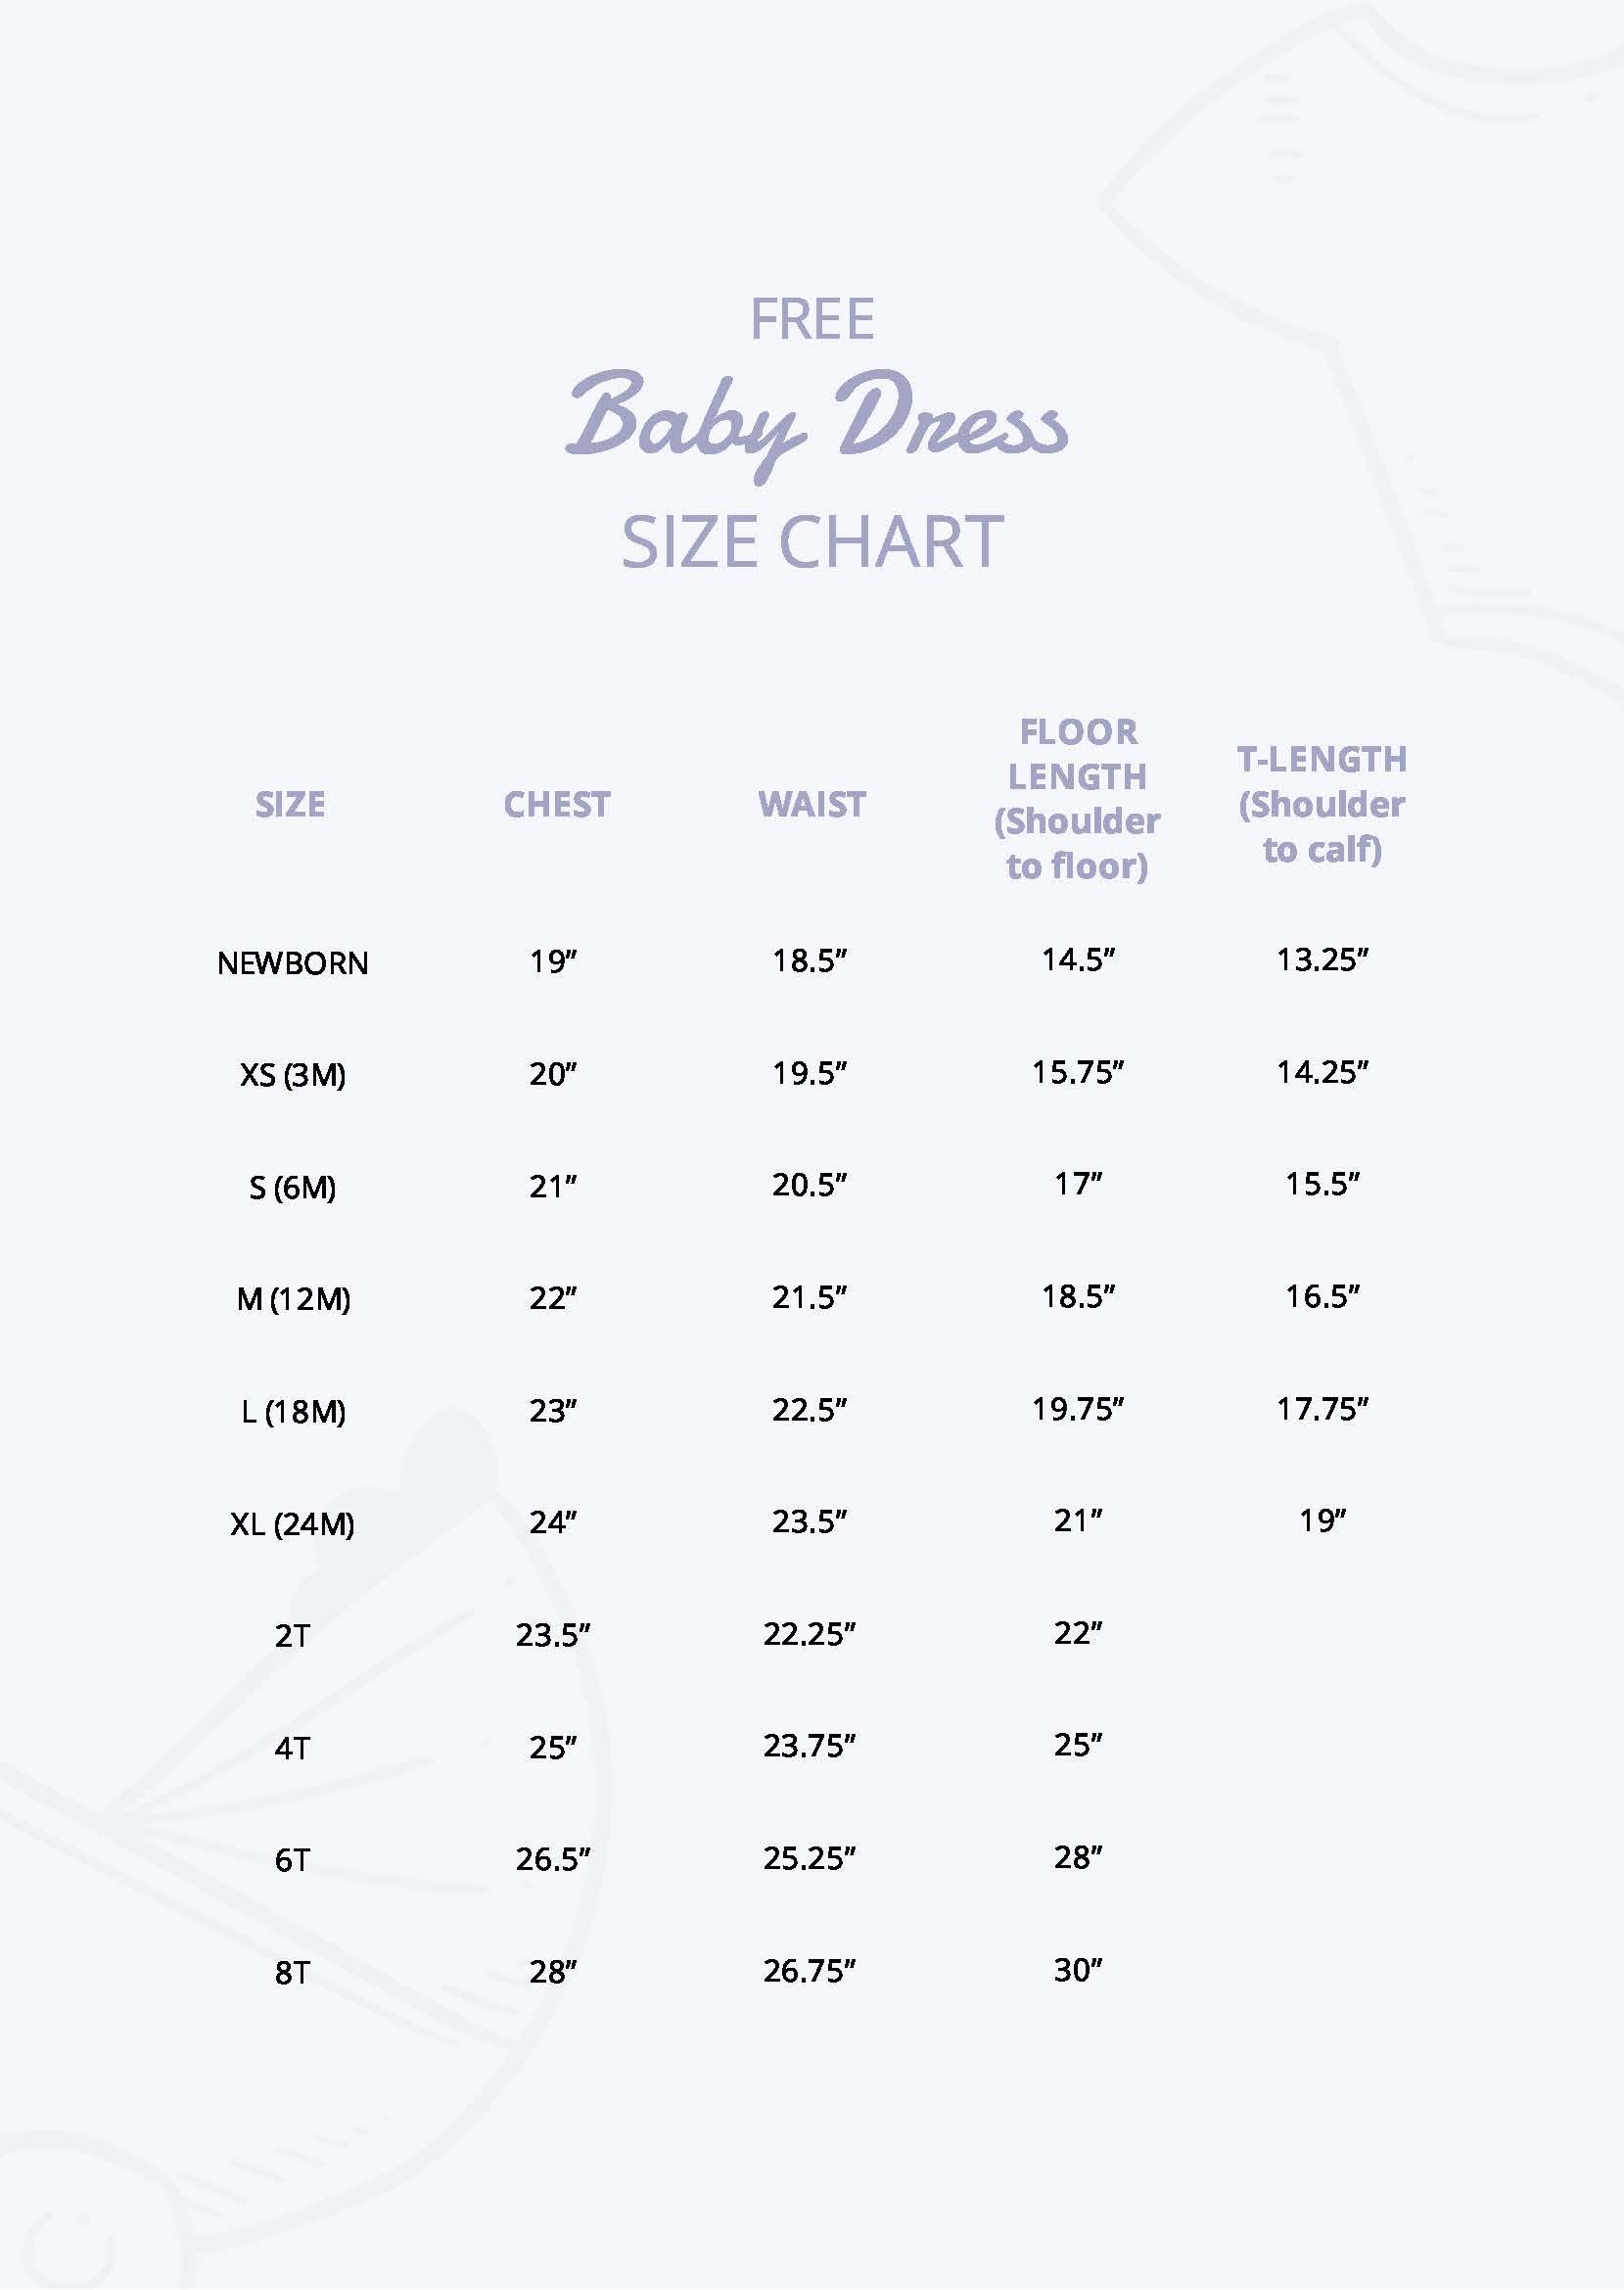 Measurement Guide and Size Chart | Kennedy Blue - Kennedy Blue